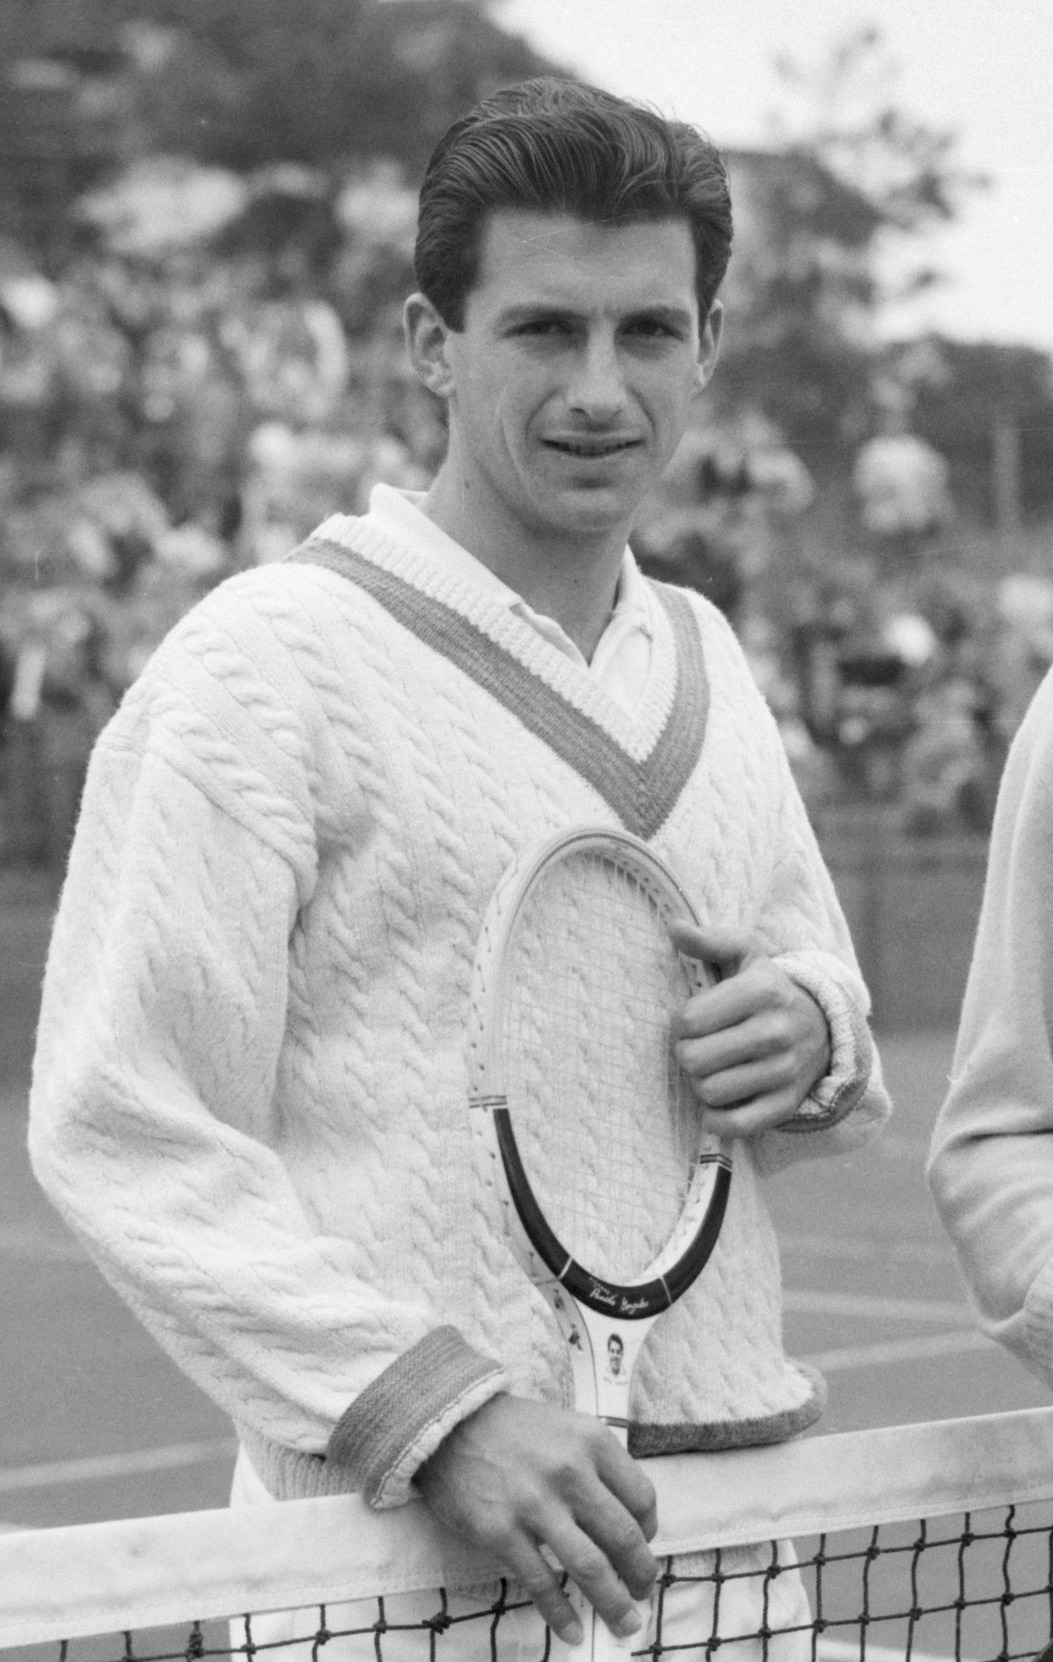 Ashley Cooper in 1958, at the height of his career. Photo: Bilsen, Joop van / Anefo, CC BY-SA 3.0 NL.